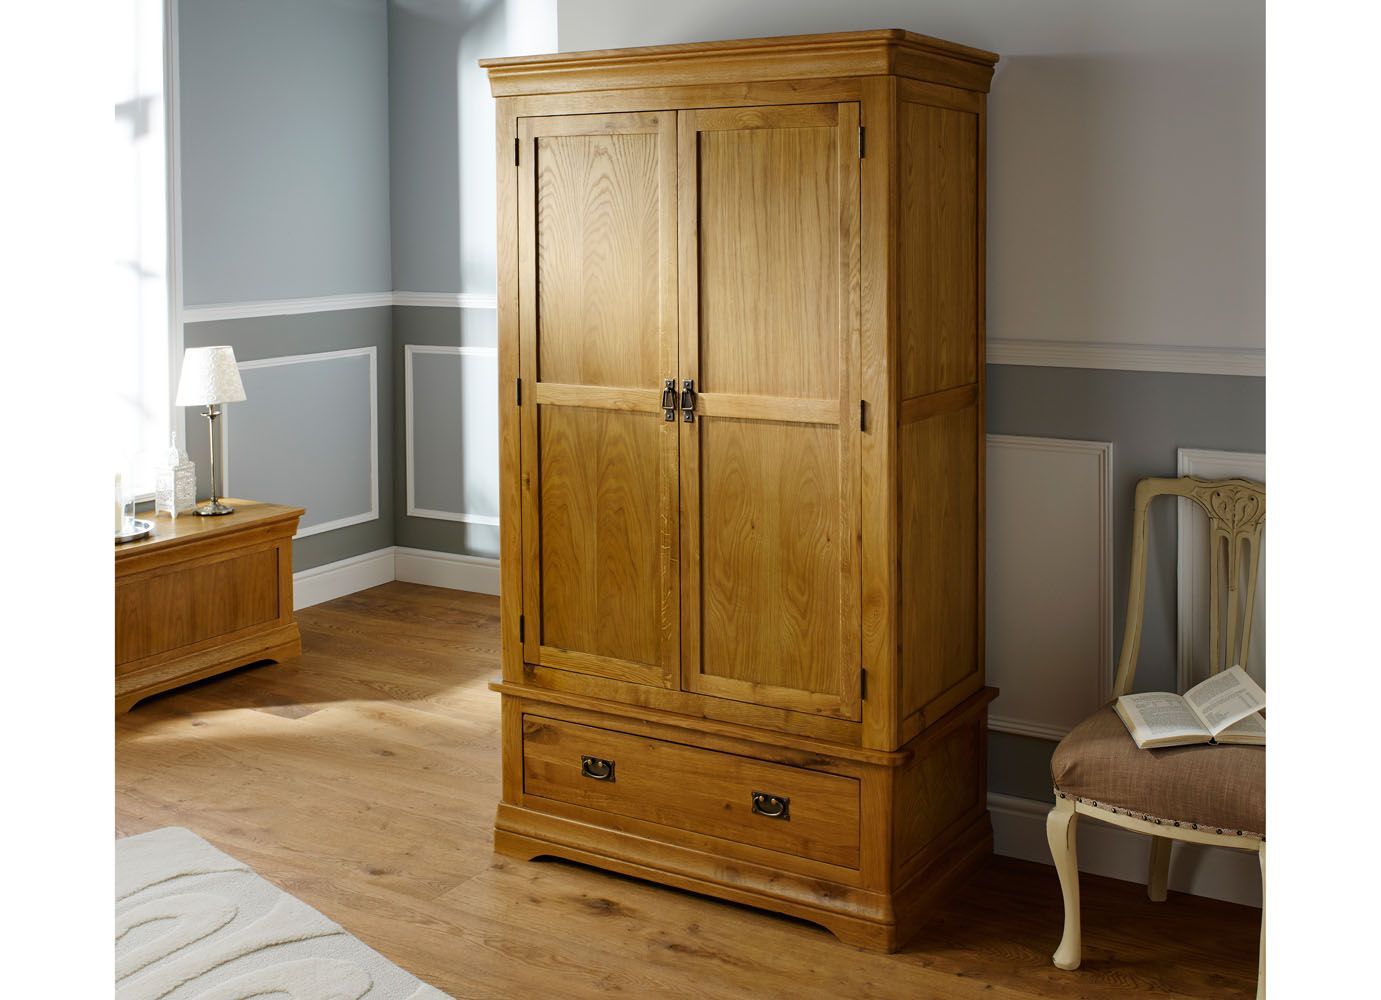 French Farmhouse Country Oak Double Wardrobe – Free Delivery | Top Furniture Throughout Single Oak Wardrobes With Drawers (View 13 of 15)